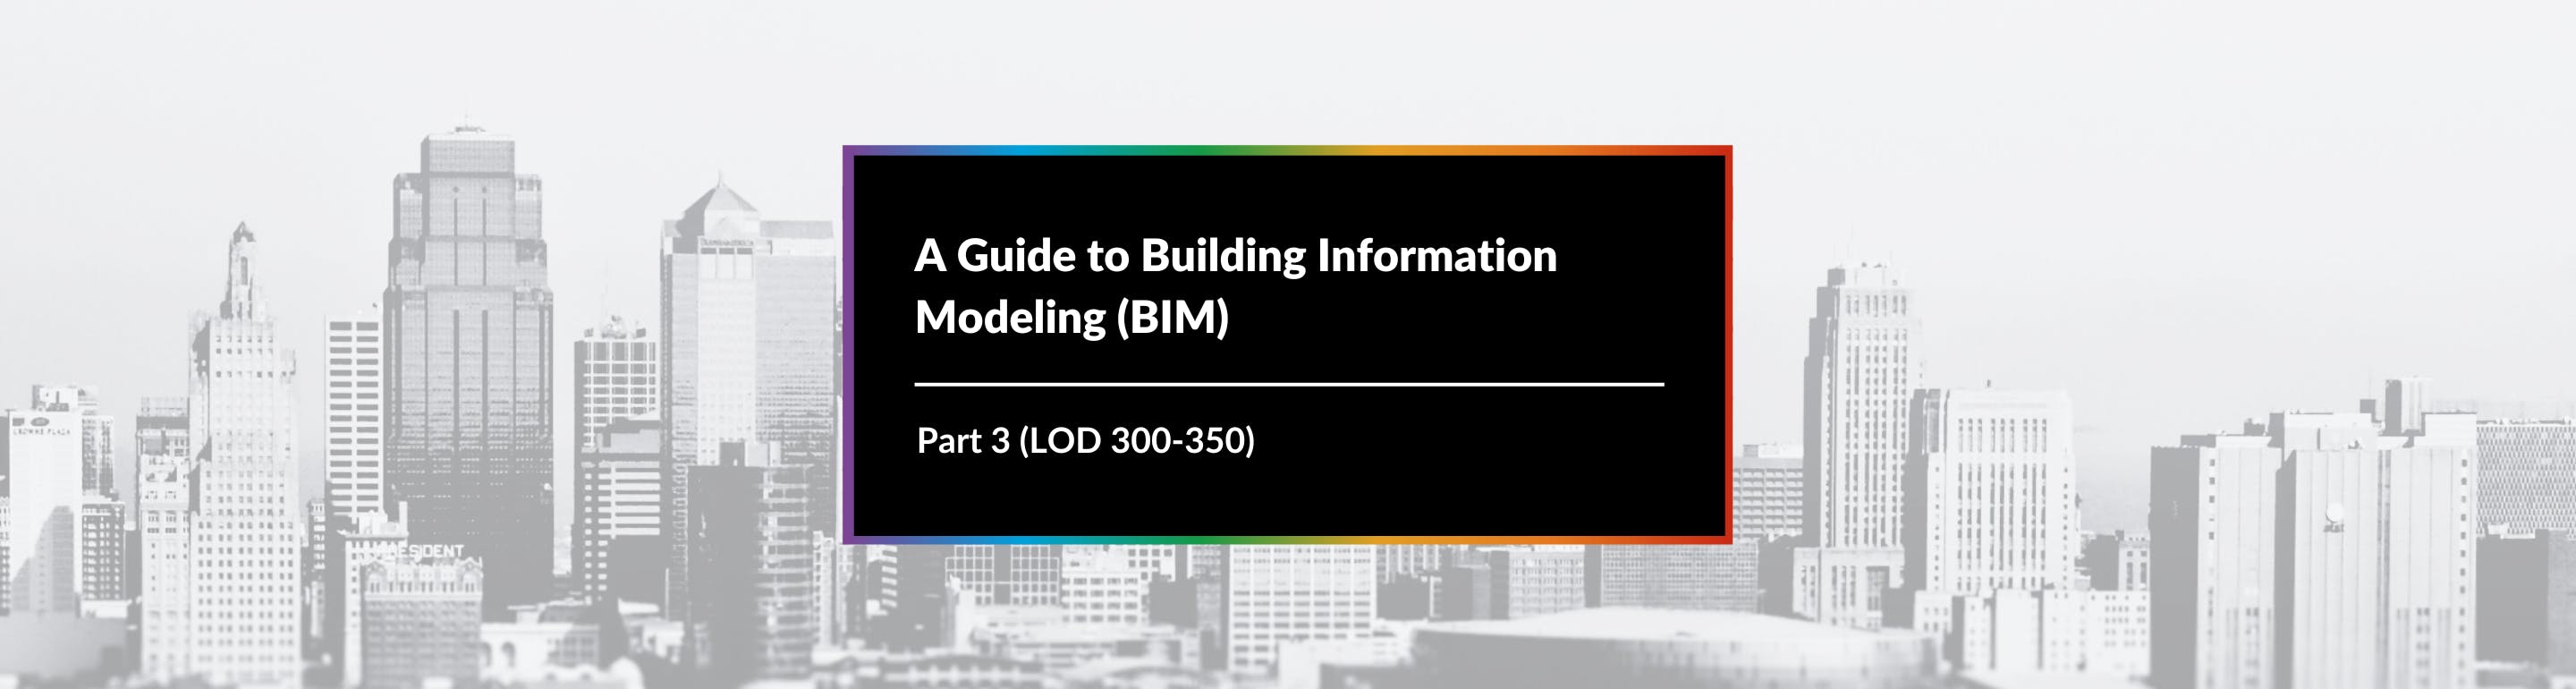 A Guide to Building Information Modeling (BIM) – Part 3 (LOD 300-350)